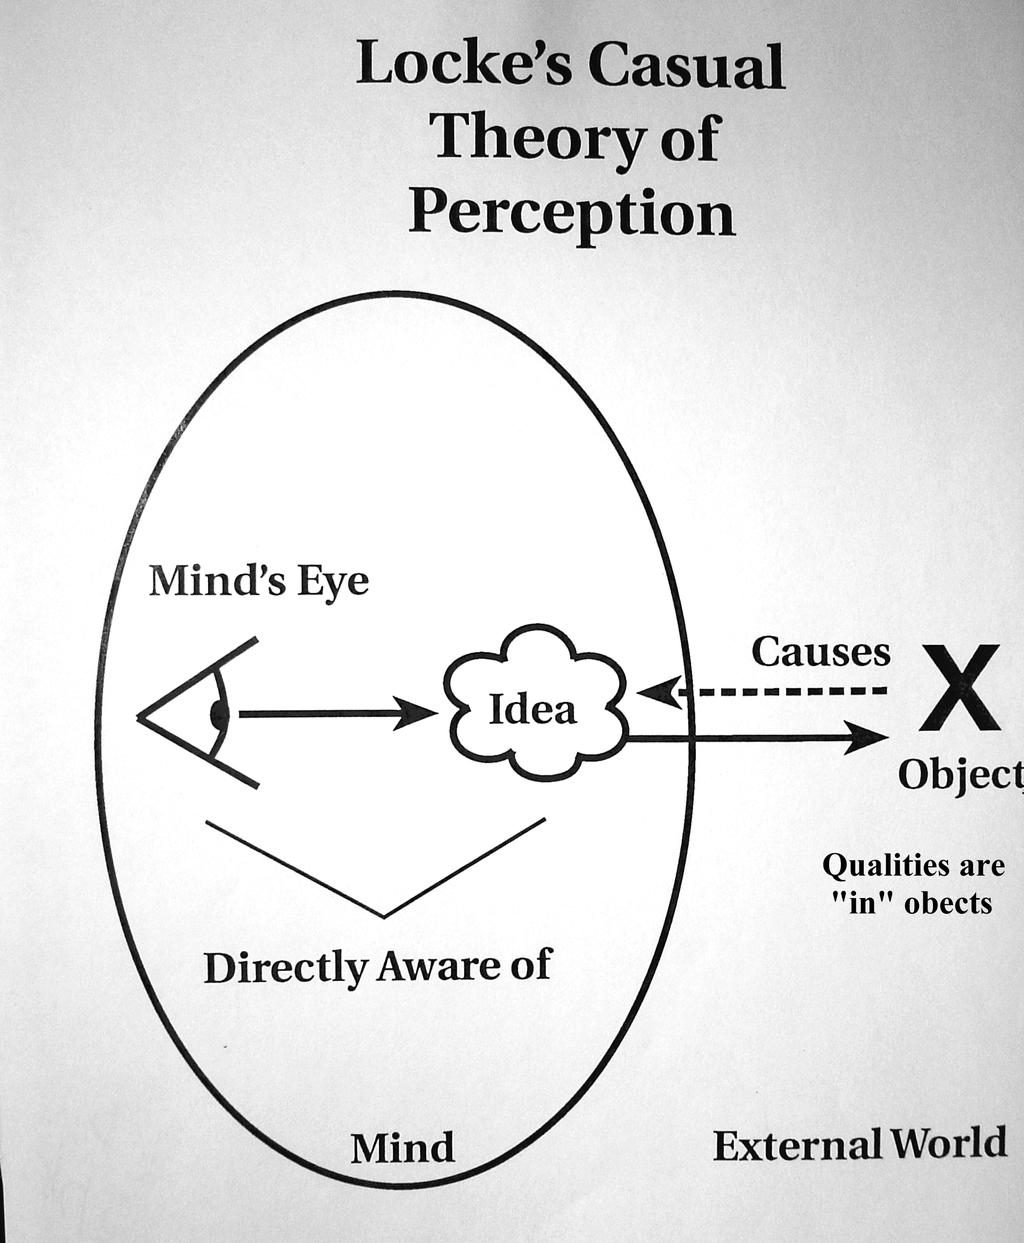 Locke s Causal Theory of Perception: We directly perceive only ideas that exist in our